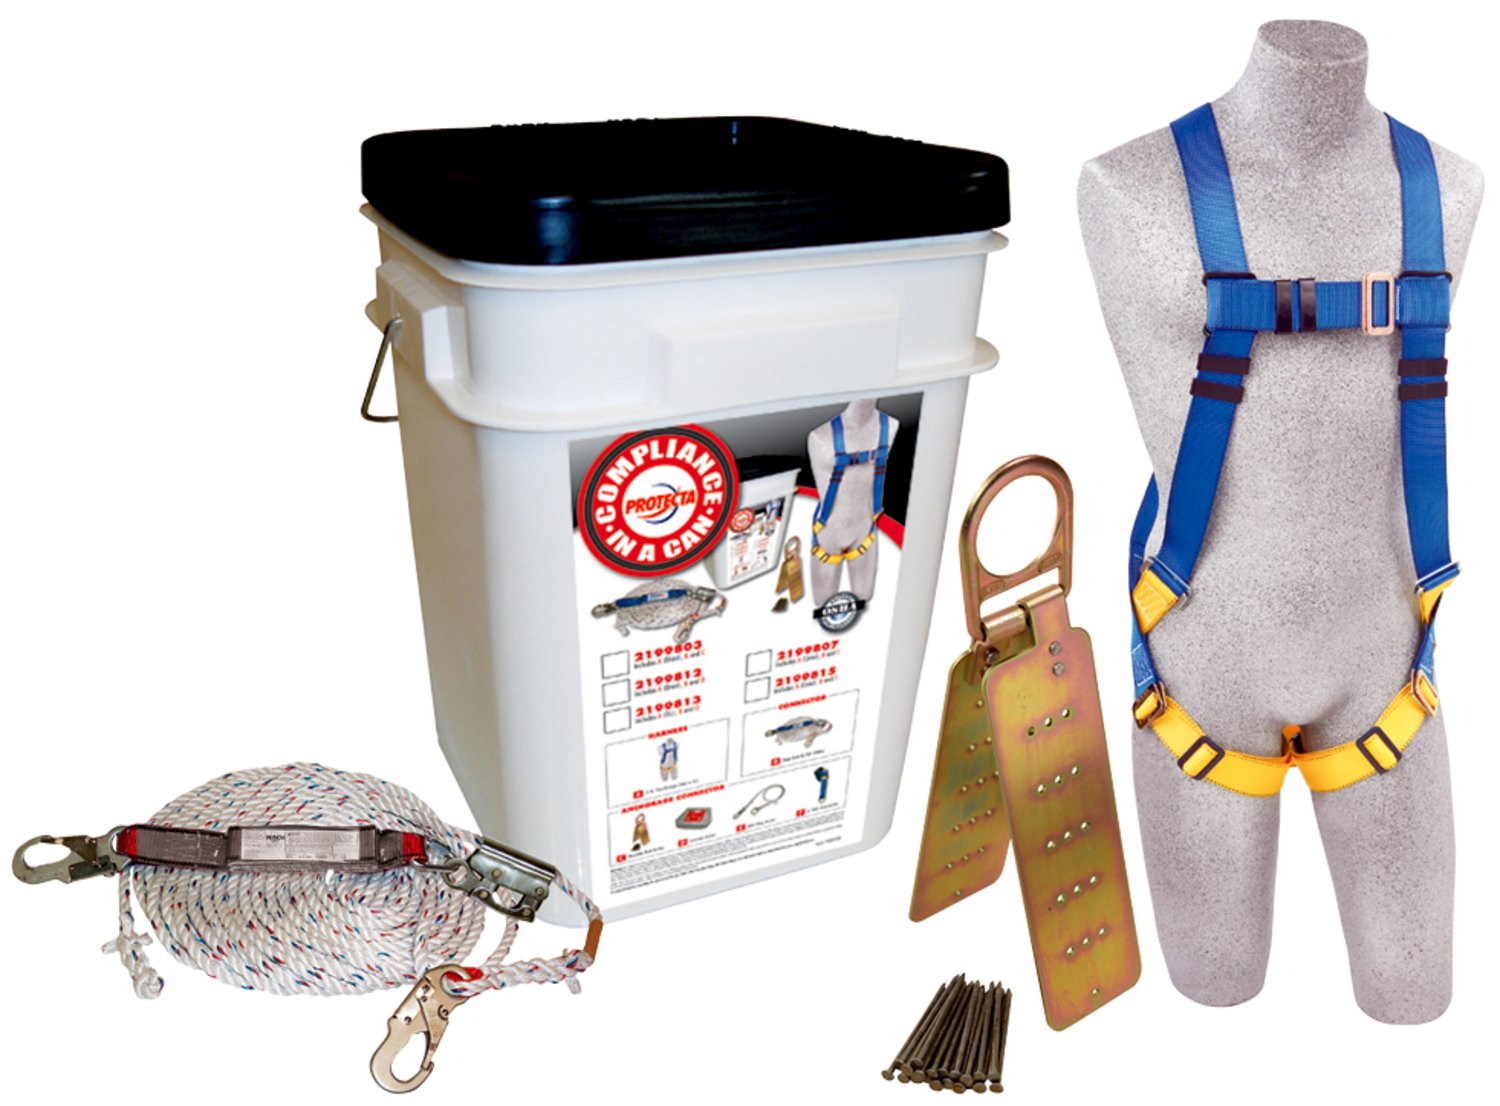 7012818386 - 3M Protecta RoofeRs Fall Protection Compliance Kit 2199803, Anchor, Harness, Rope Grab/Lanyard, Lifeline, 50 ft